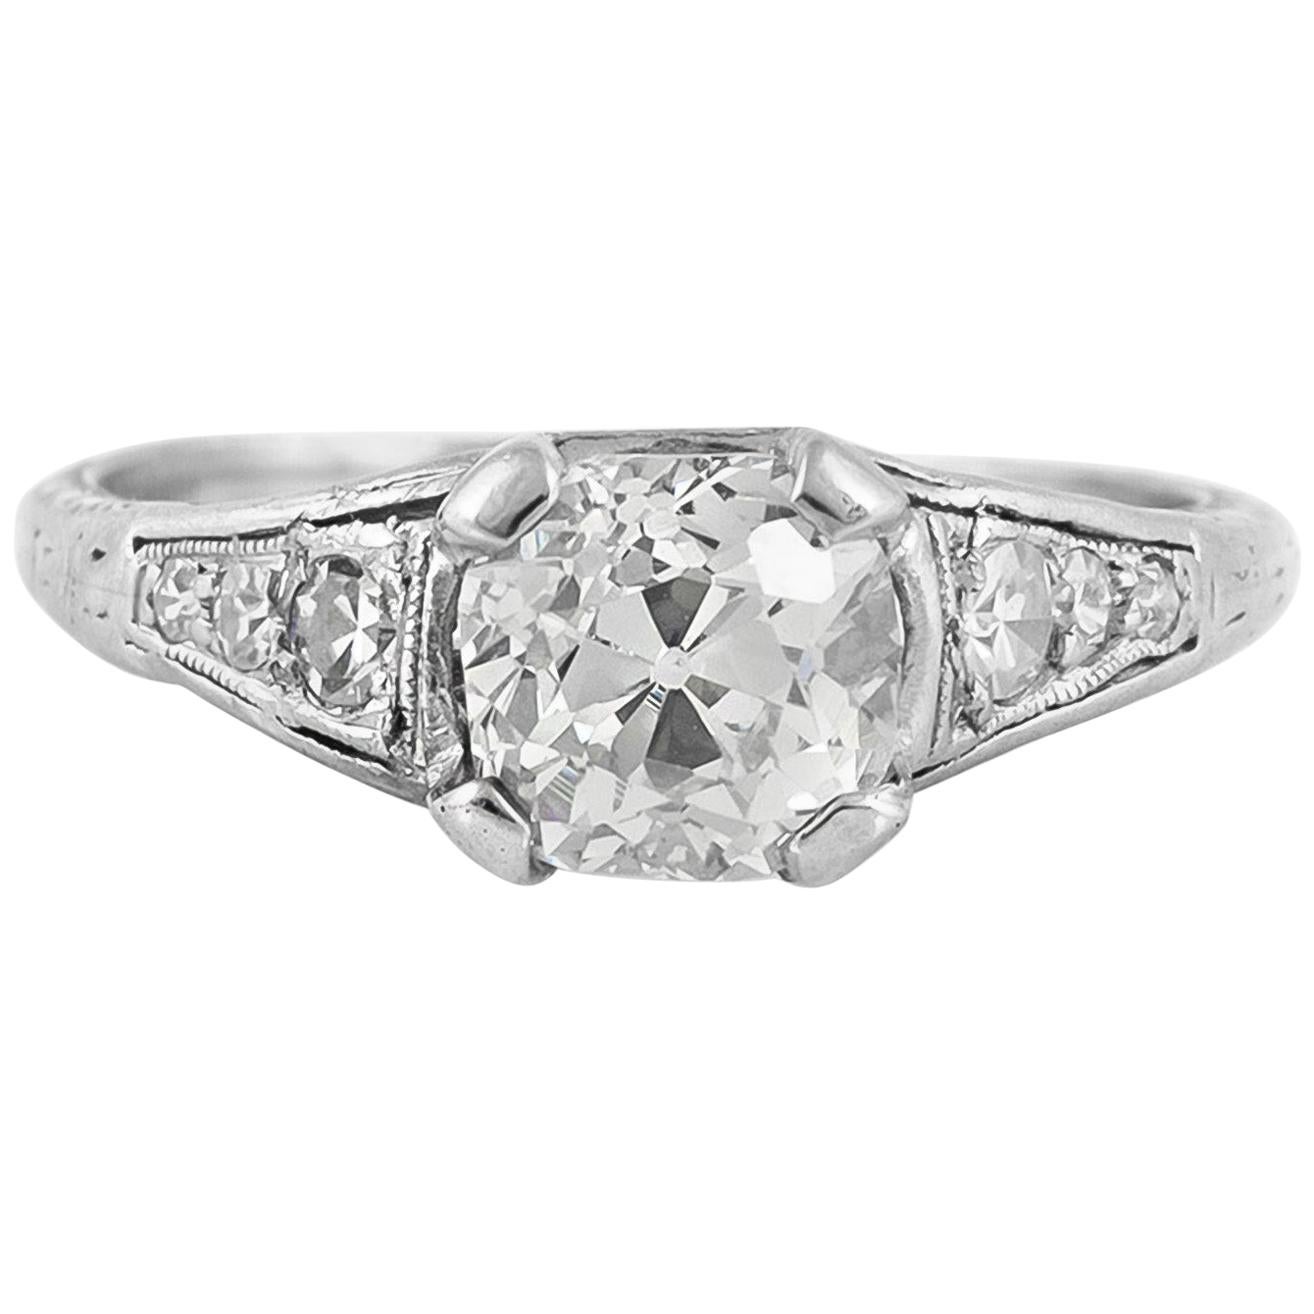 1920s-1930s Filigree with 1.80 Round Diamond Engagement Ring For Sale